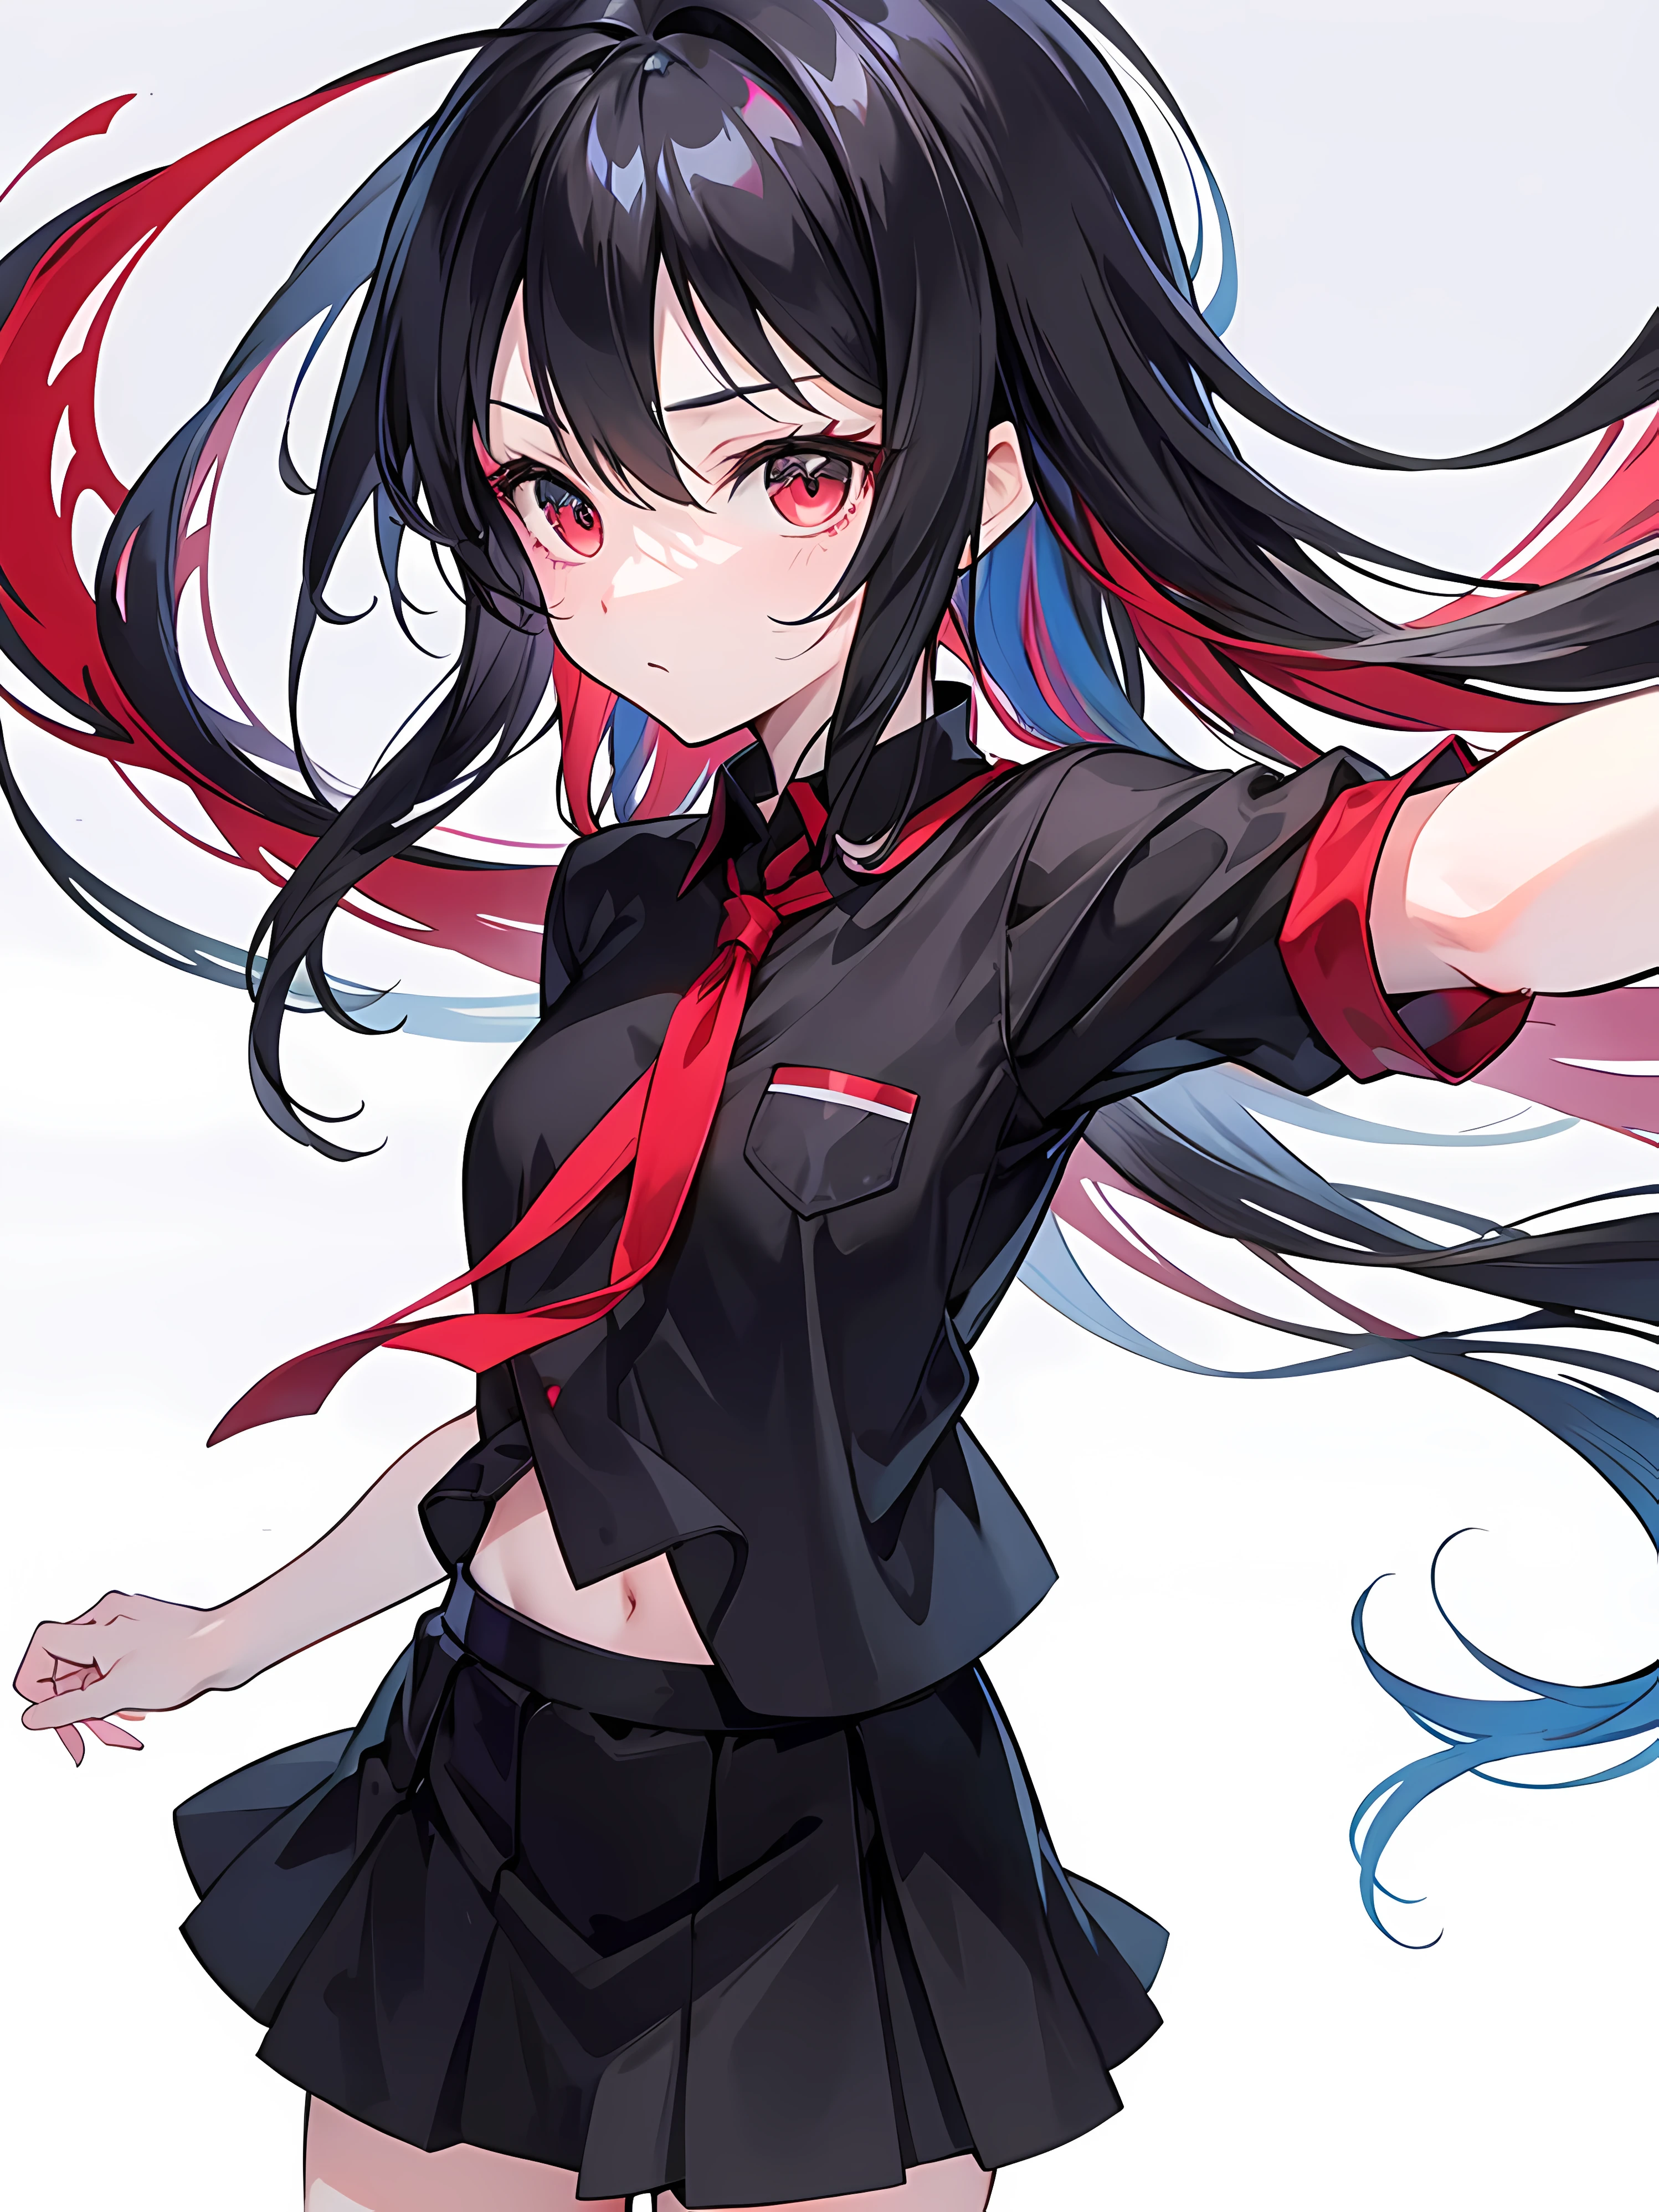 Anime girl with long gray black hair and black and white costumes, best anime 4k konachang wallpaper, kantai collection style, anime art wallpaper 8k, black long hair, black red, anime style 4k, long white hair, anime art wallpaper 4k, anime art wallpaper 4k, digital art on pixiv, anime girl with long black hair and black and white costume, Shi Tao's anime manga, pixiv competition winner, process art, best anime 4k konachang wallpaper, kantai collection style, anime art wallpaper 8 K, long black hair, black red, anime style 4 K, long white hair, ultra hd, (4k, masterpiece, best quality), shuimobysim, electronic, cyber, cool, maxiskit, dress open 1 cool girl, solo, brunette hair, long hair, black, look at the audience, tease, ((masterpiece, best quality)), (1 cooi girl), (solo) , (female focus), (ahoge, black and red hair, long hair), red eyes, (black shirt), (buttoned shirt)), ((black skirt), (short skirt)), standing, color background, bright color, gradient, colorful, behind arms, hand details, hand clear, hand complete, face detail, face close-up, eye HD, pupil clear, Detailed background